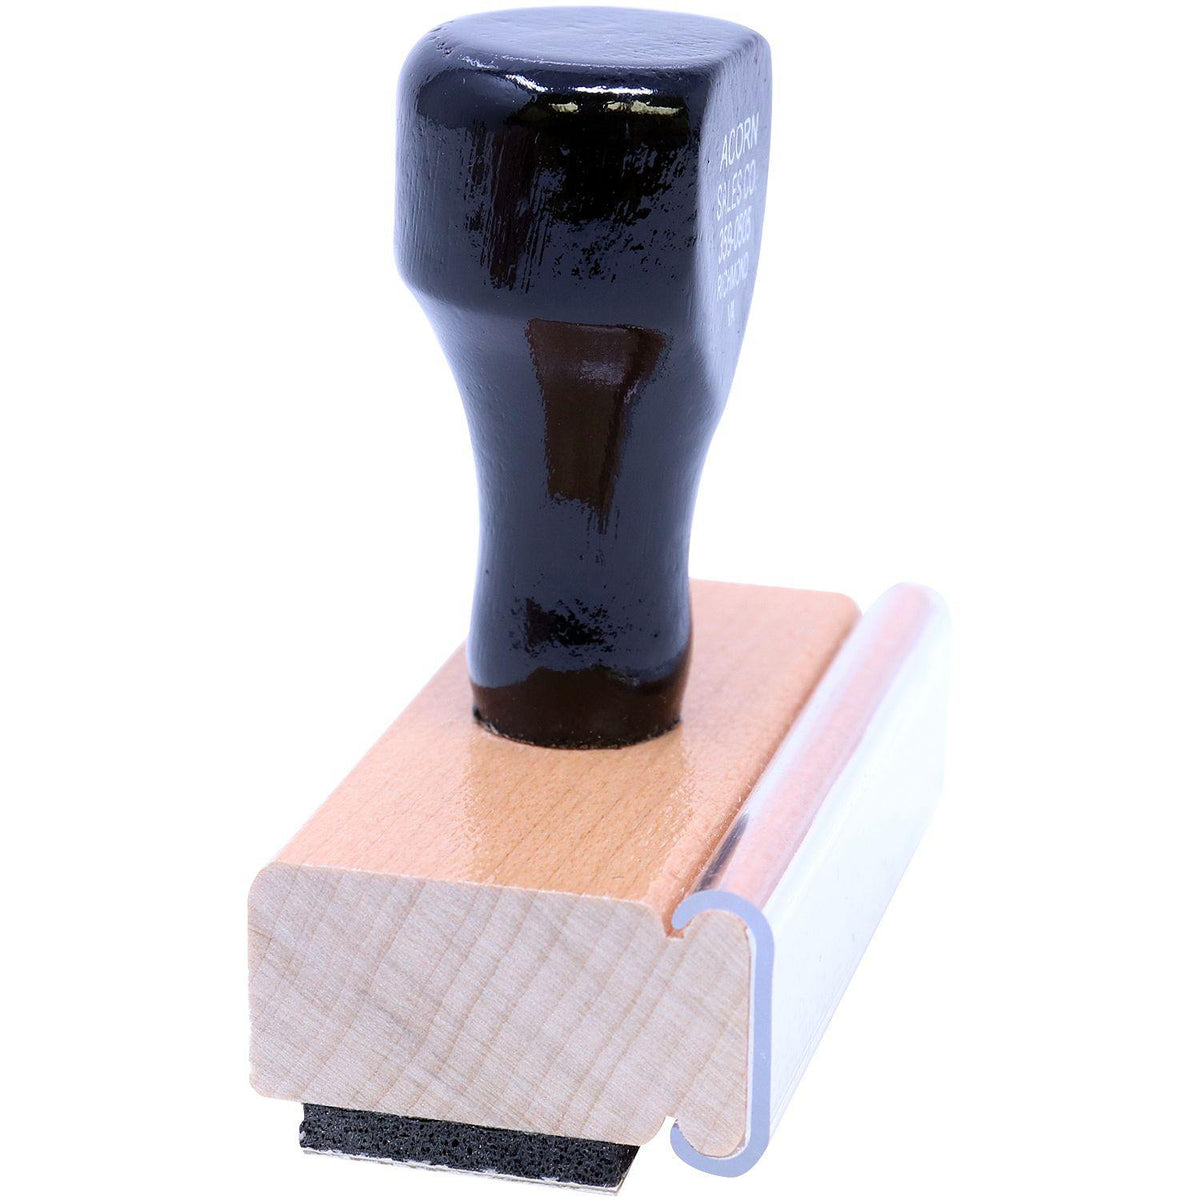 Side View of Bold Font File Rubber Stamp at an Angle